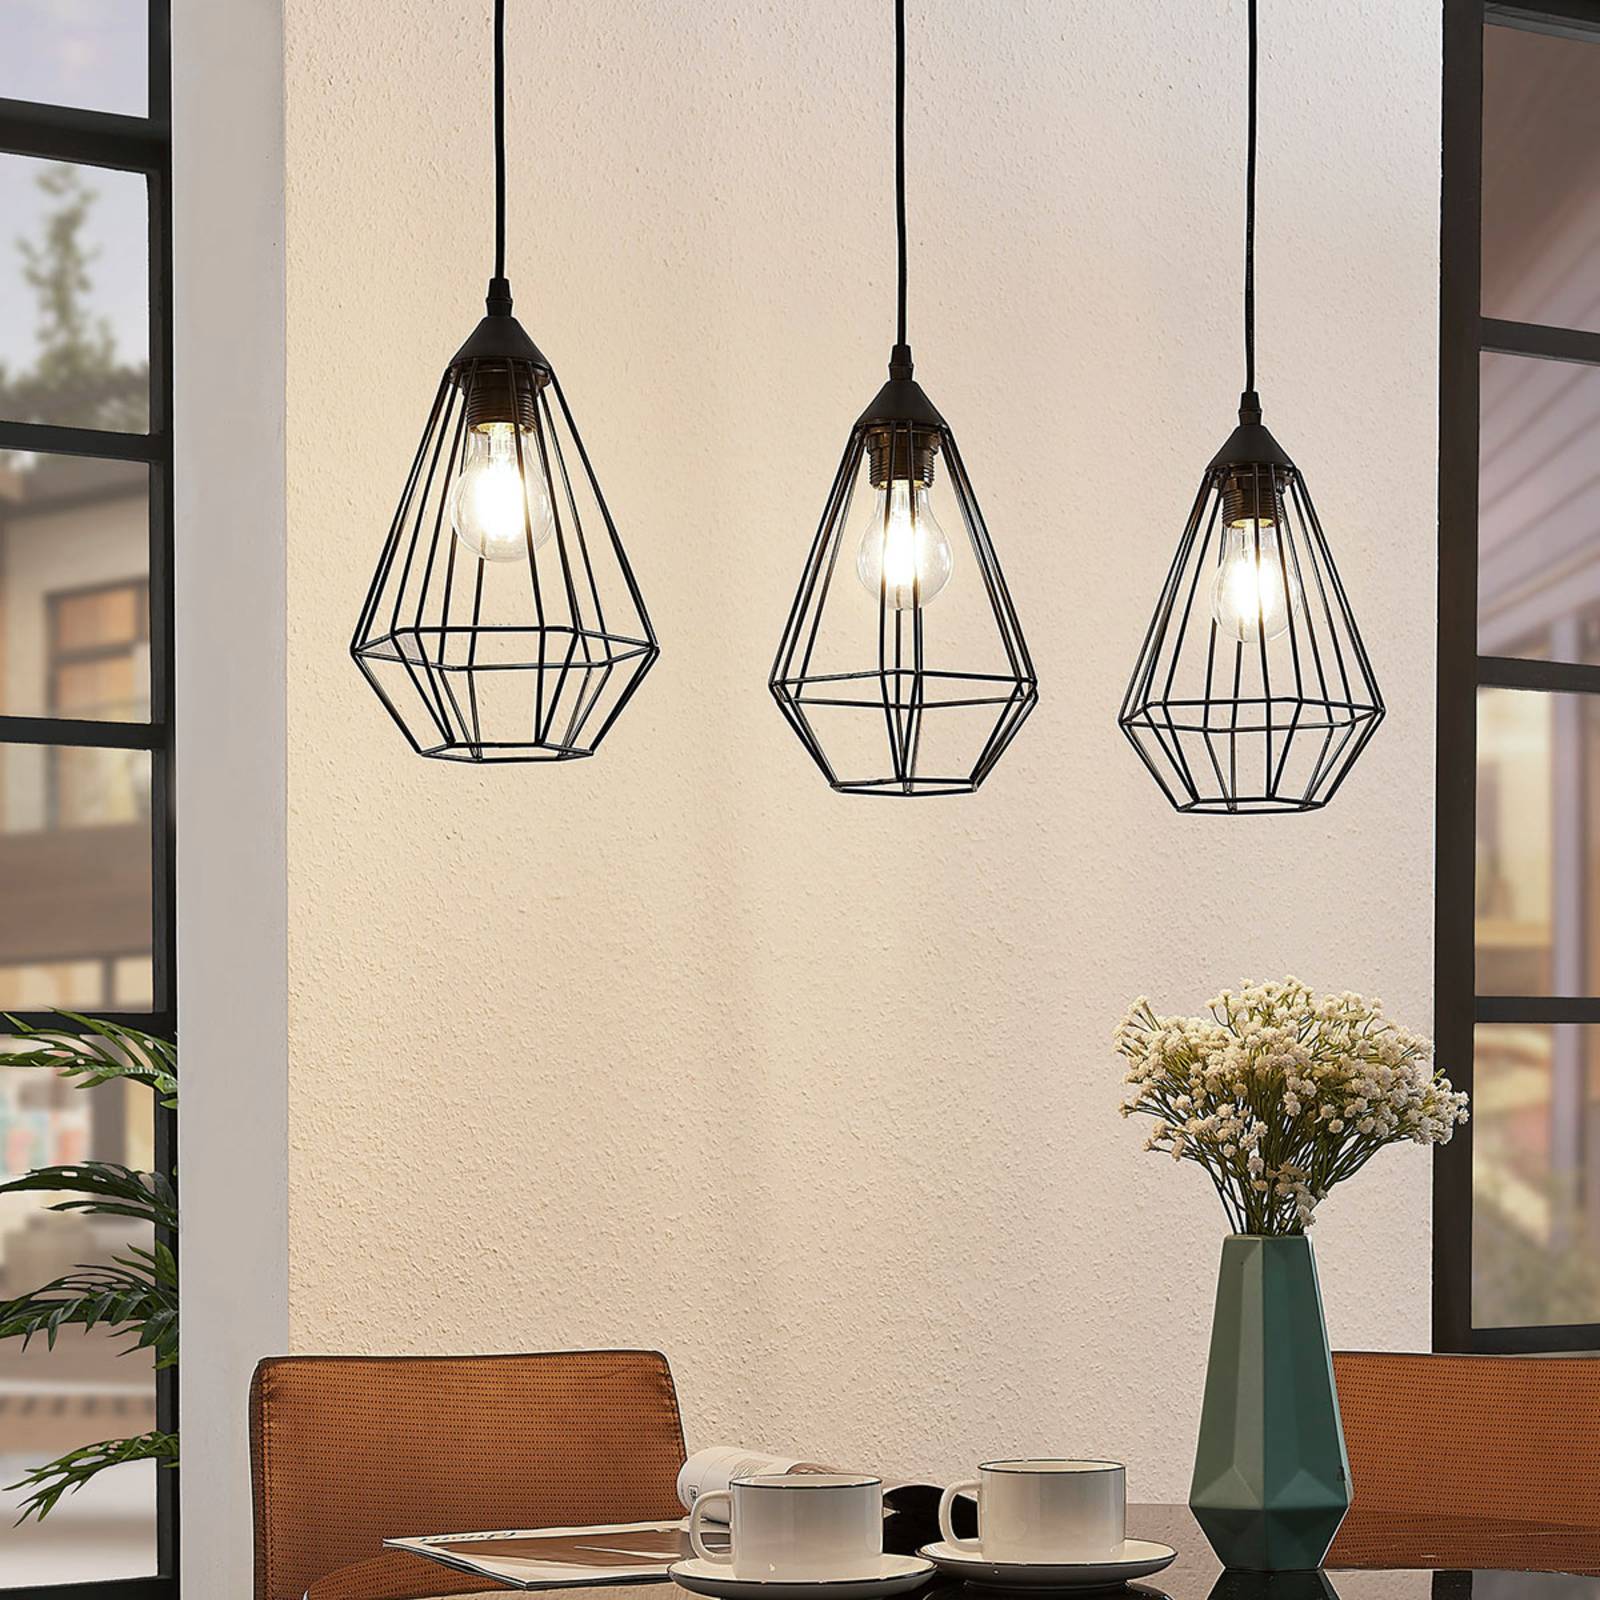 Photos - Chandelier / Lamp Lindby Elda pendant light with cages, linear, black 